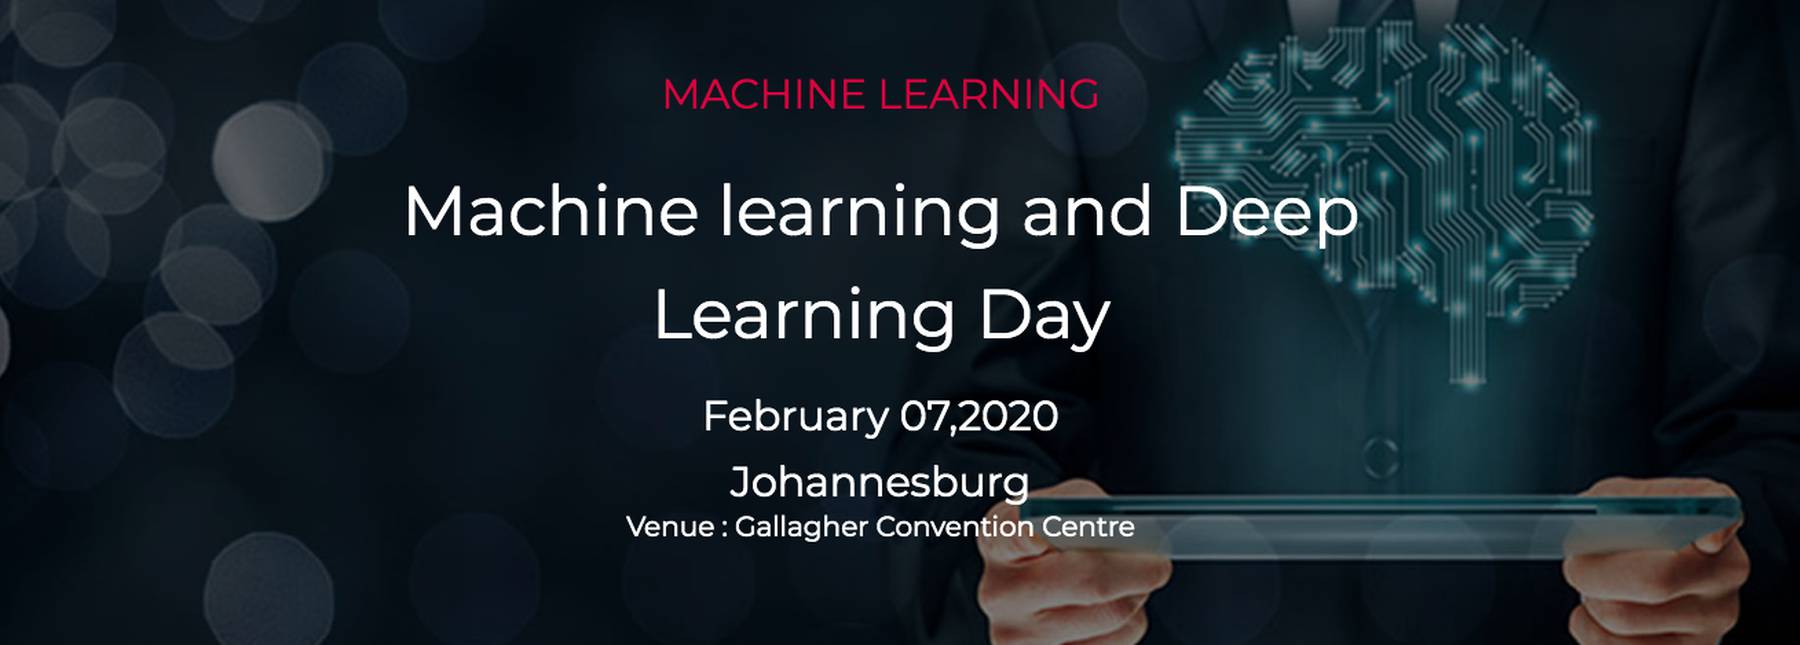 Machine learning and Deep Learning Day Johannesburg 2020